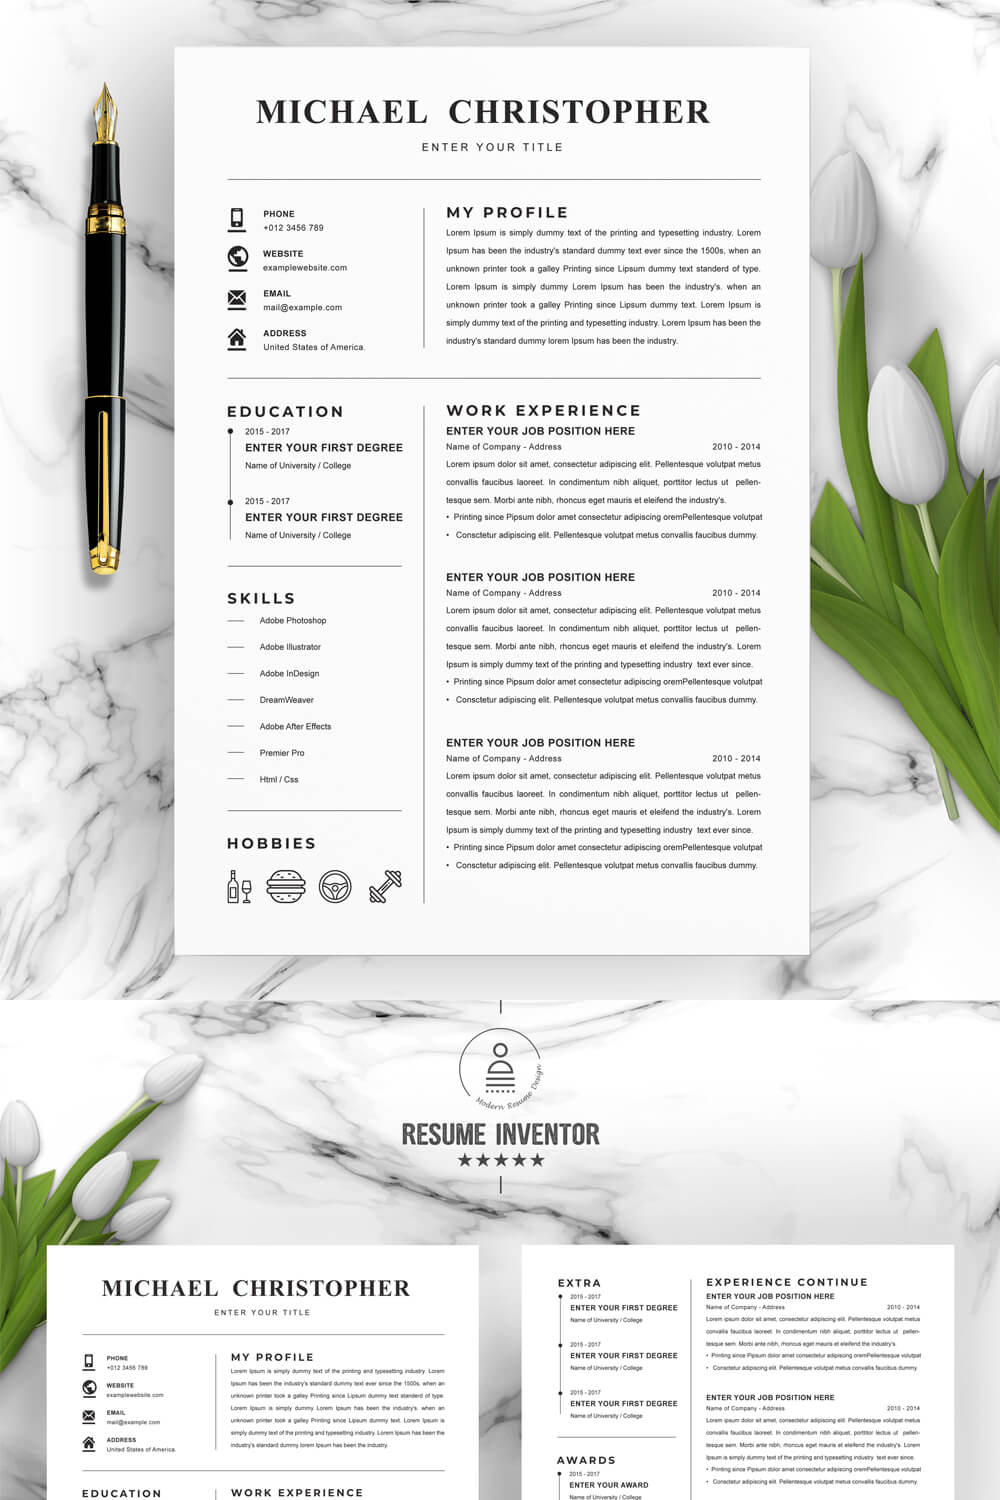 Clean Resume Template | Simple Resume Template Download in Word PSD AI Formats pinterest preview image.